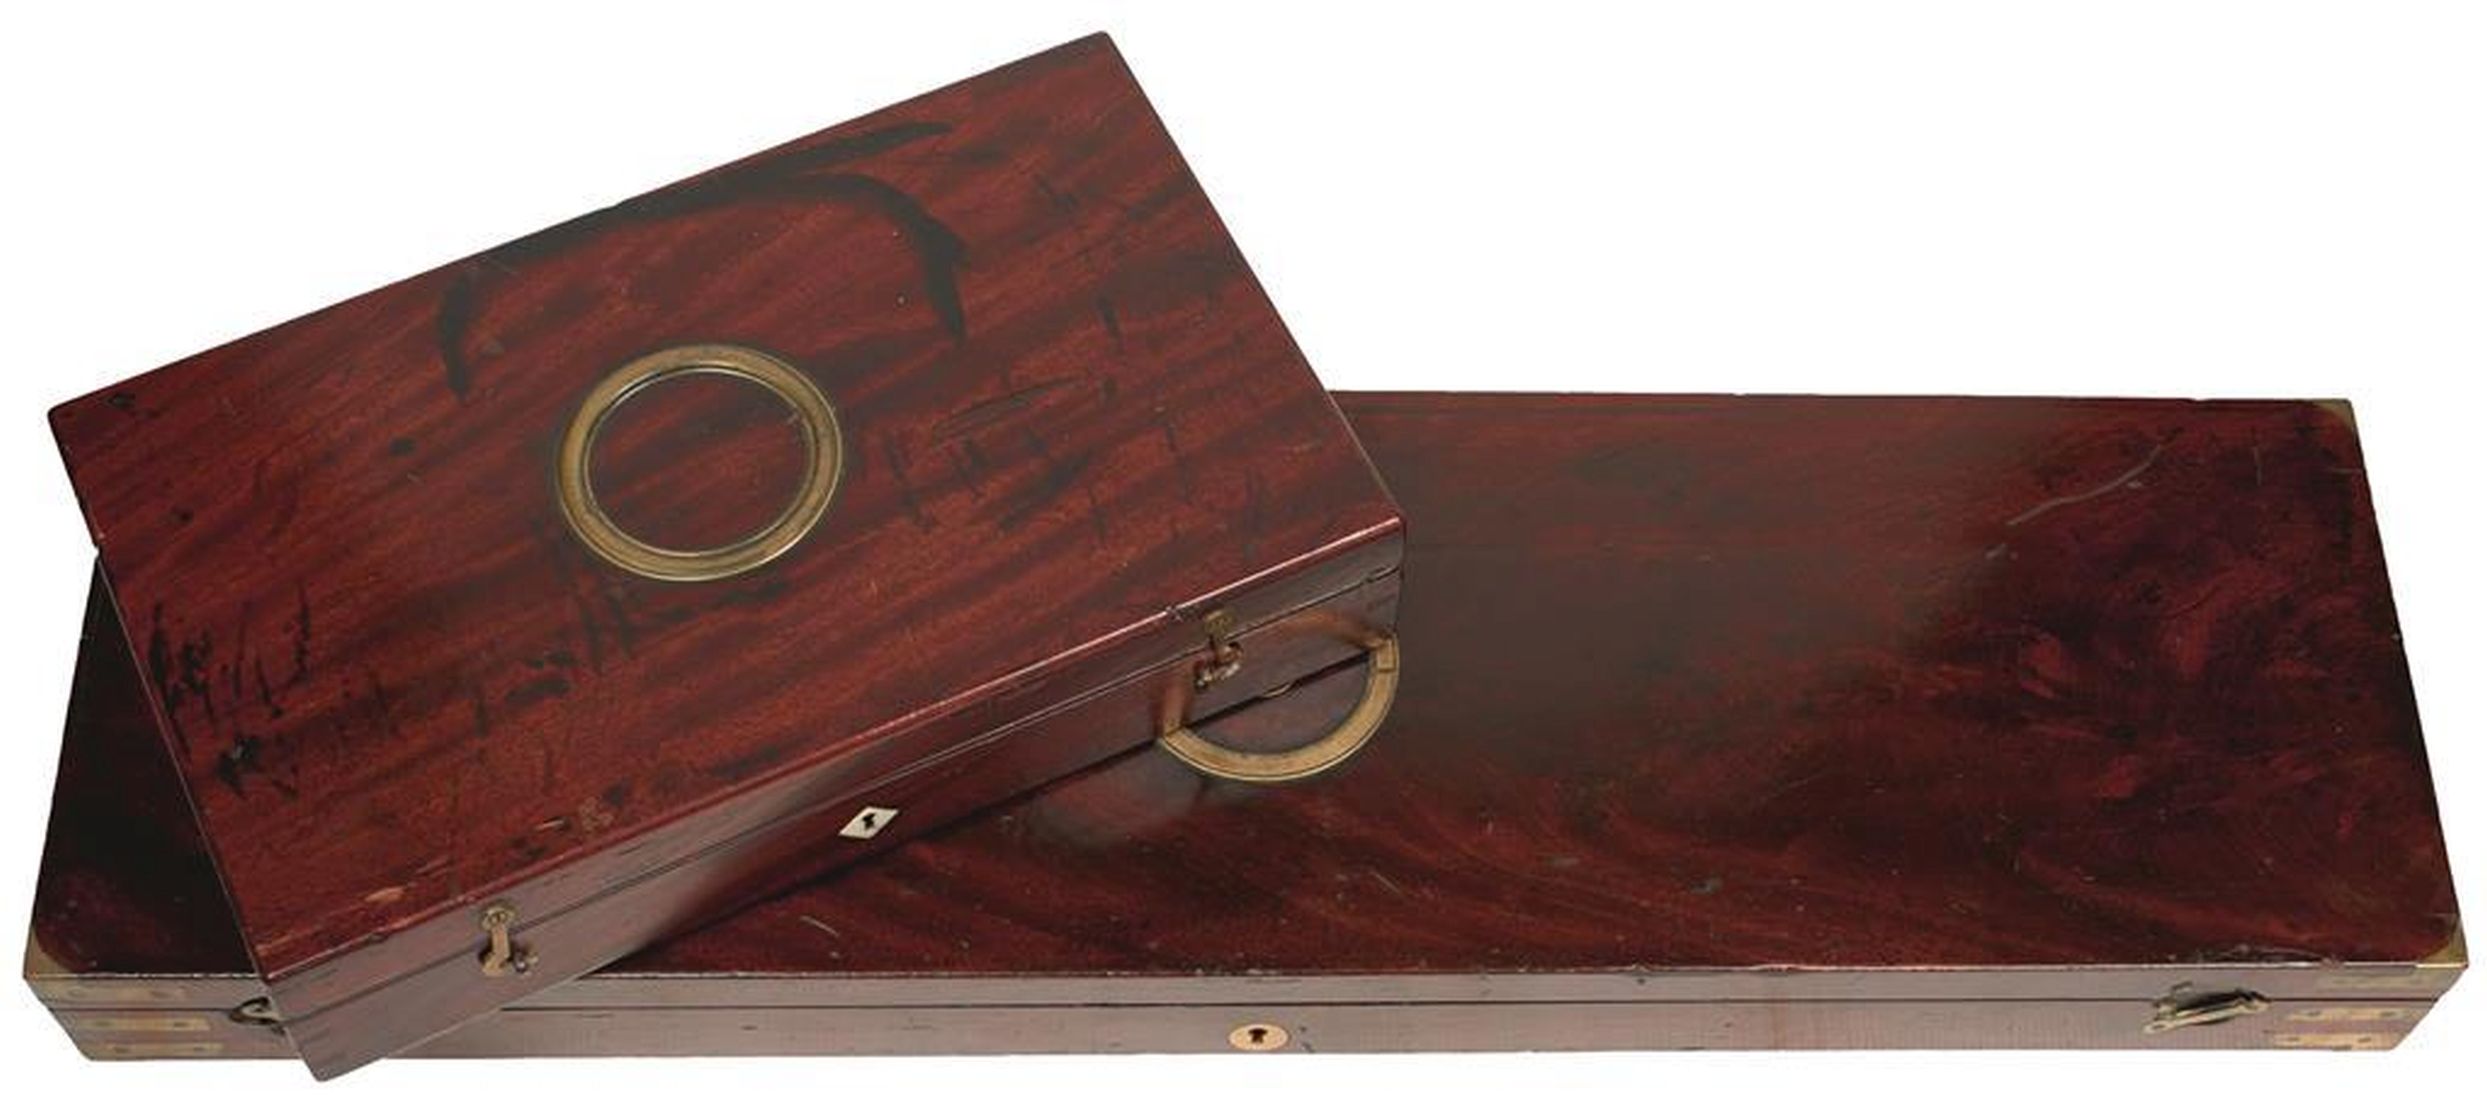 A BRASS BOUND MAHOGANY SPORTING GUN CASE, for a gun with 32inch barrels, red felt lining, partitions